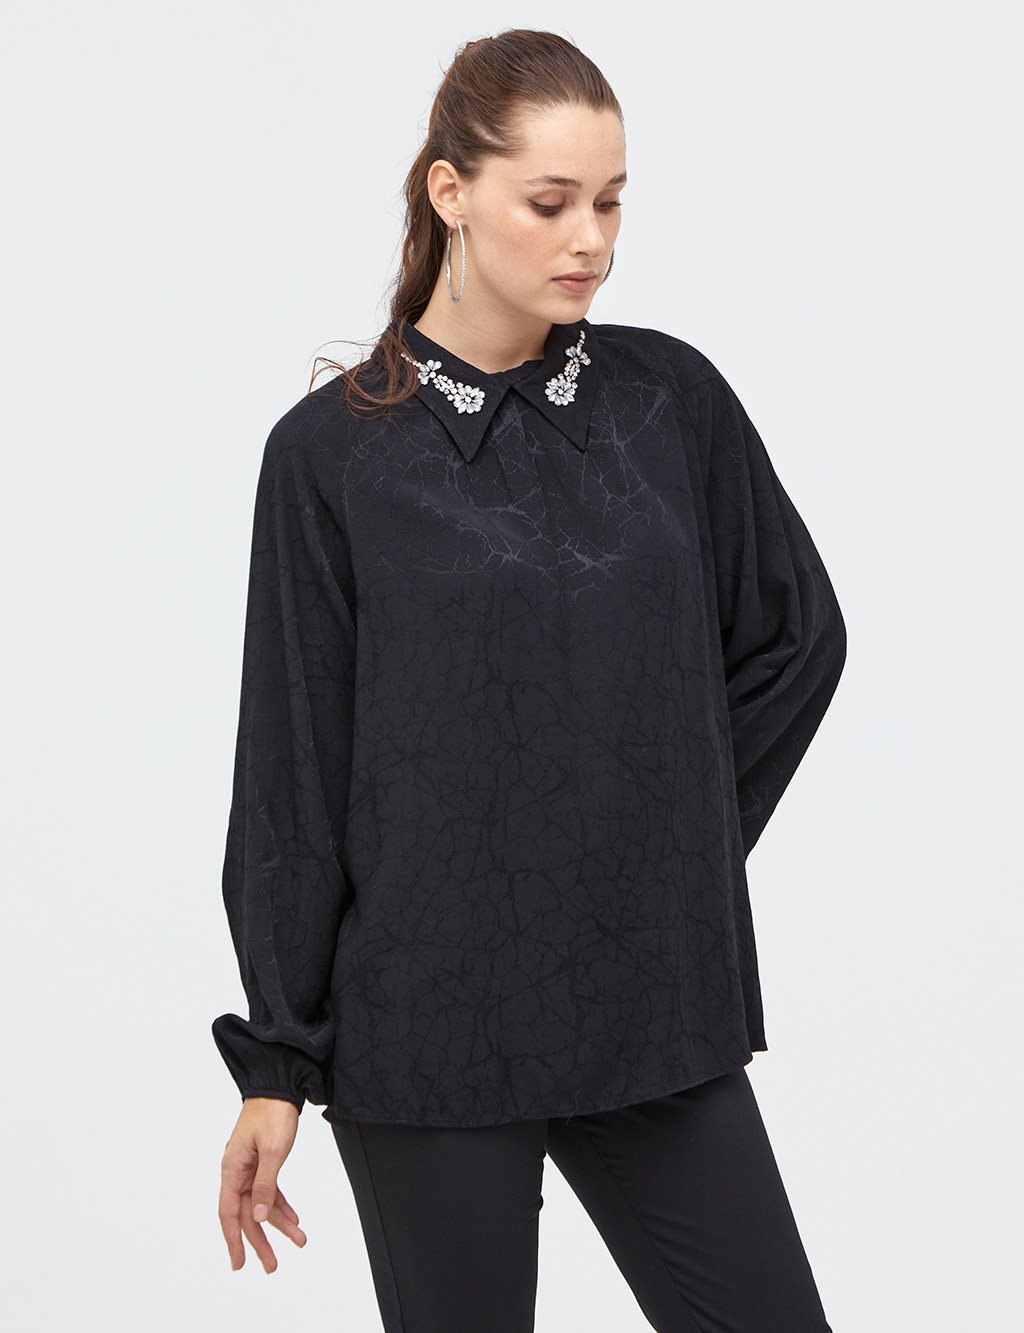 Embroidered Sleeves Round Neck Collar Blouse Black